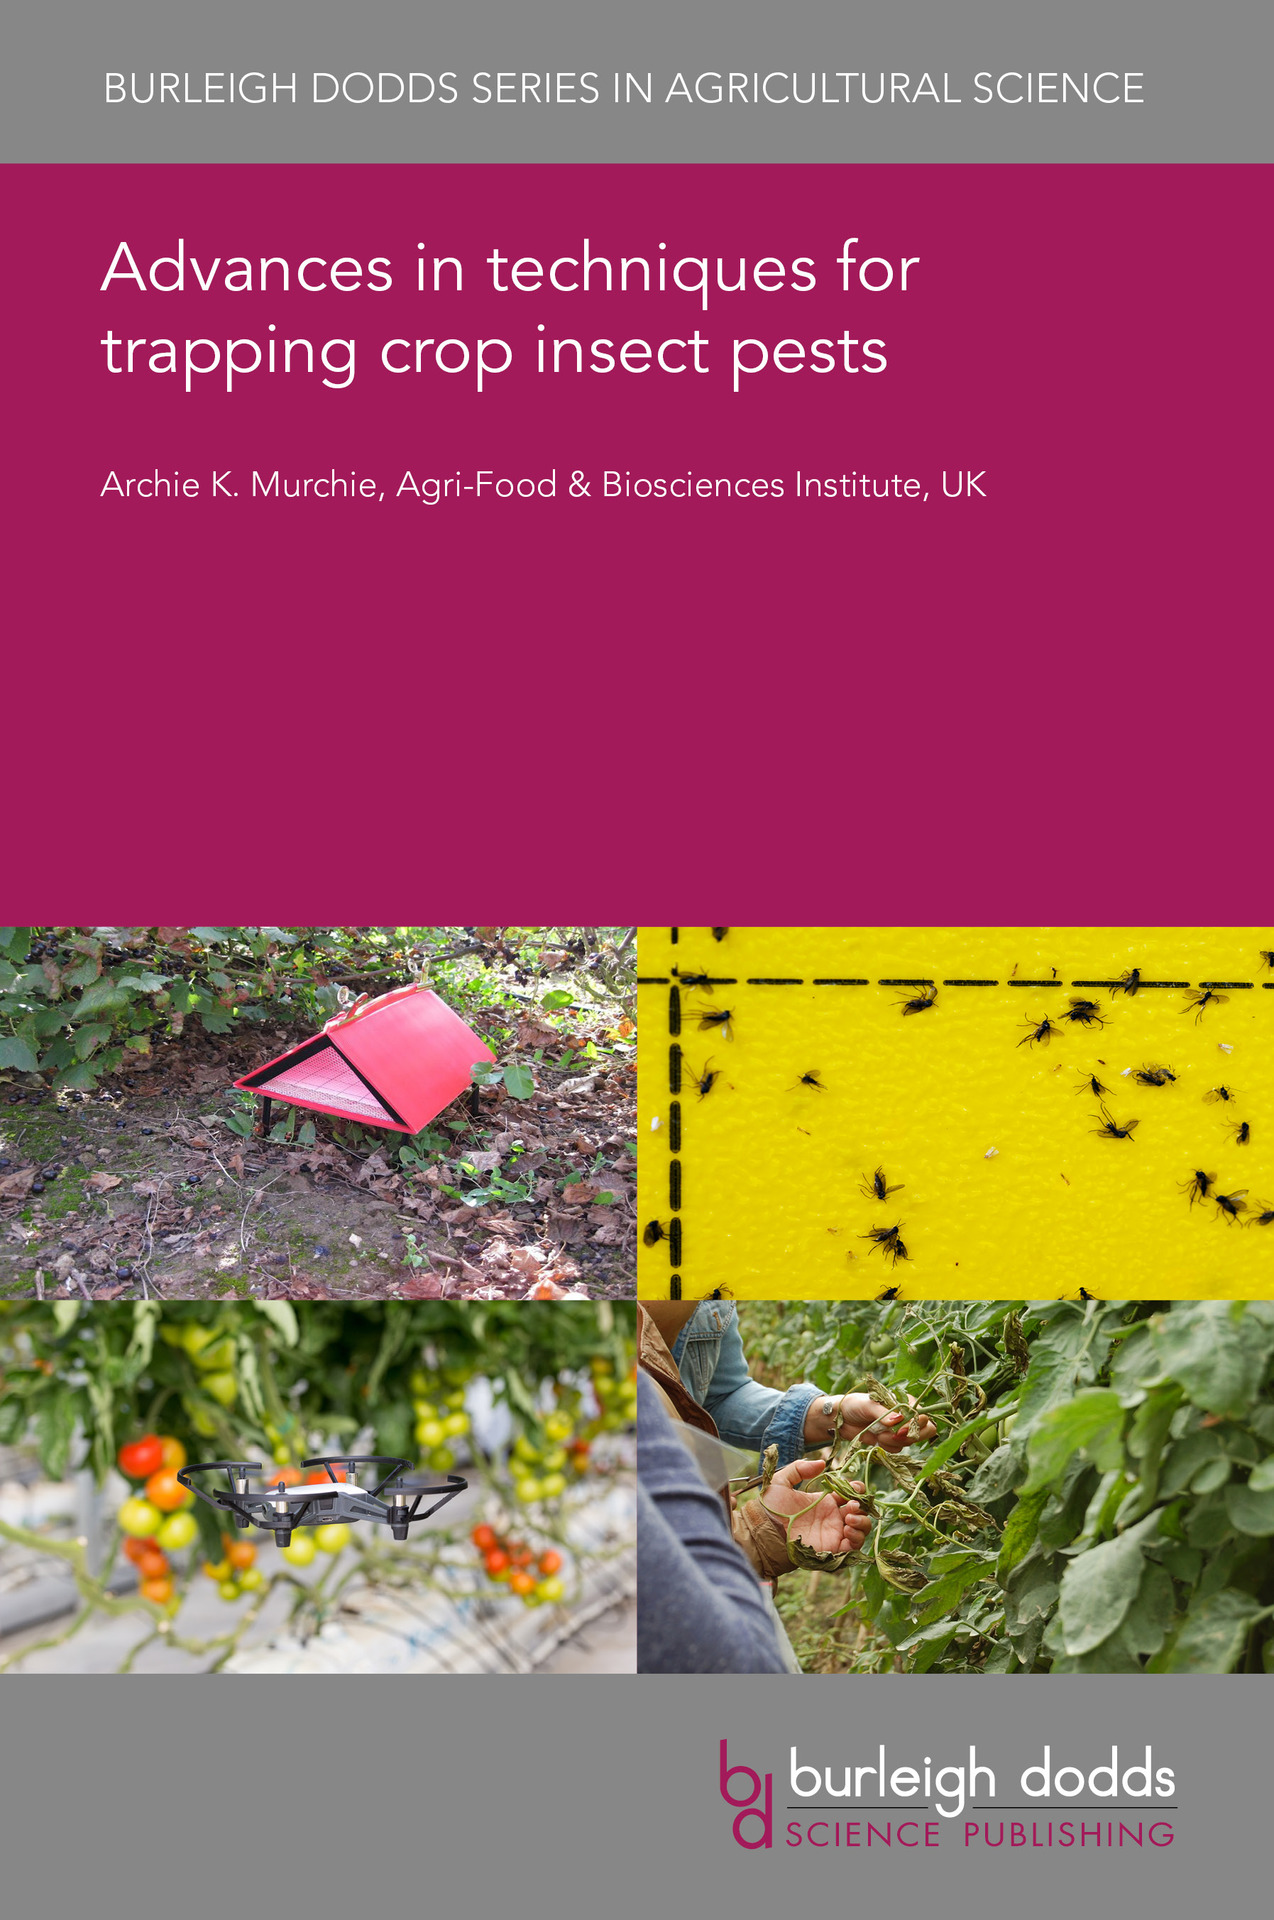 Advances in techniques for trapping crop insect pests